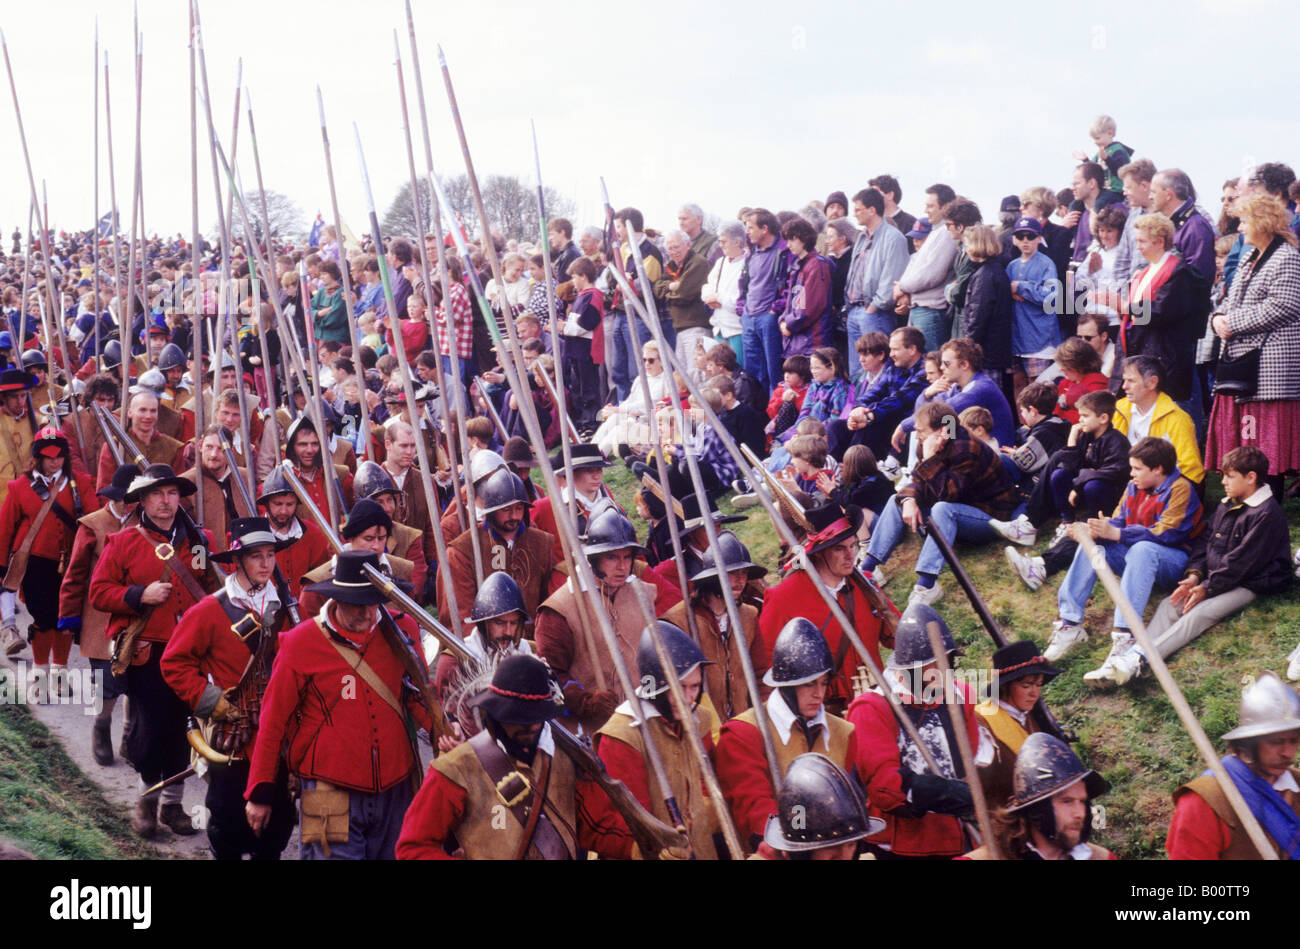 Historical re-enactment marching pikemen English Civil War foot soldiers spectators pikes weapons 17th century Cromwell battle Stock Photo